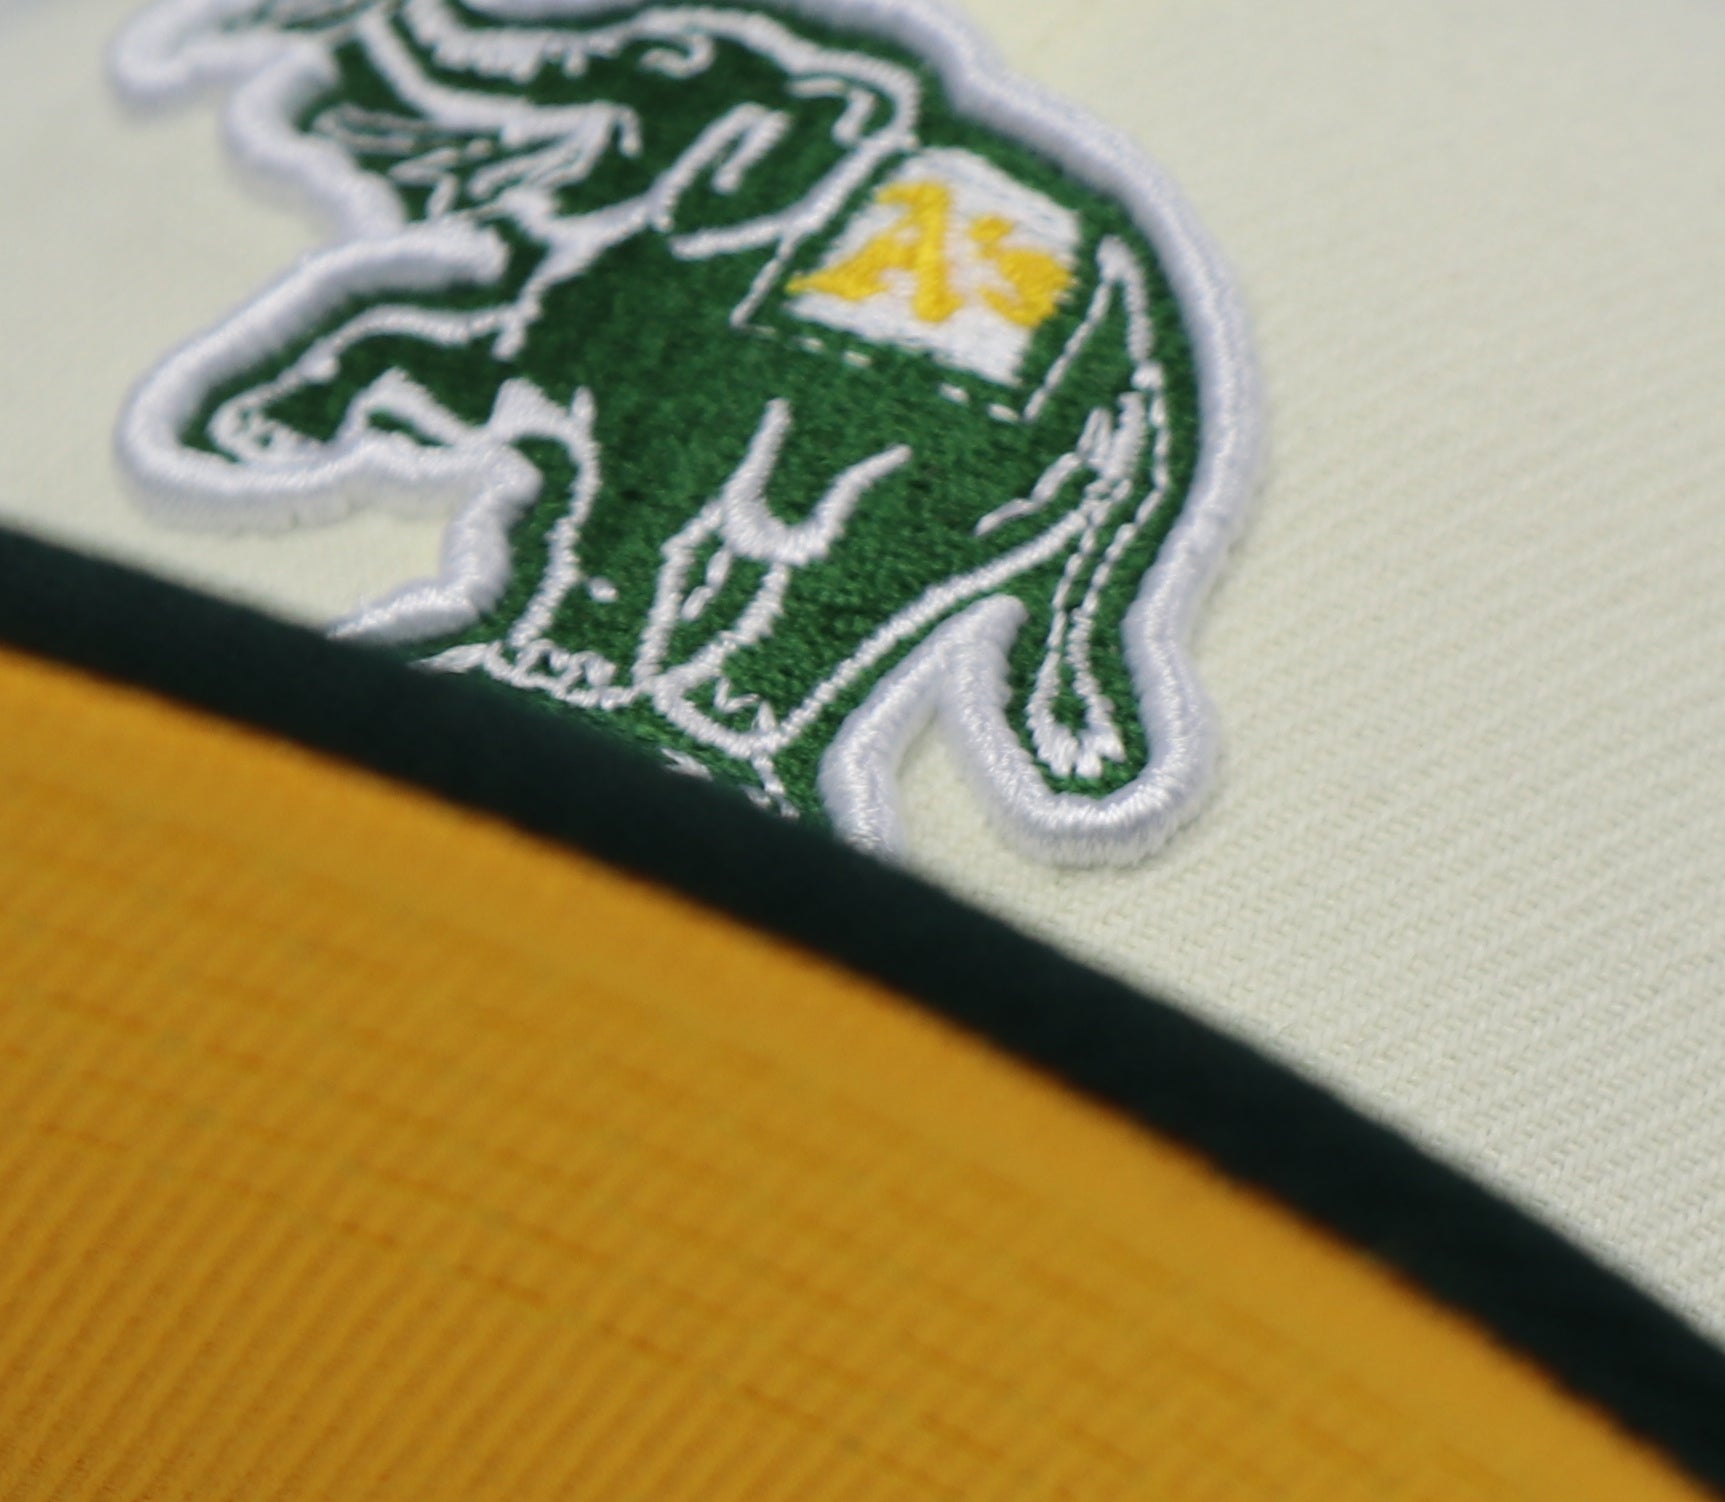 "KIDS"- OAKLAND ATHLETICS (OFF-WHITE)  "40TH ANNIVERSARY" NEW ERA 59FIFTY FITTED  (A-GOLD UNDER VISOR)